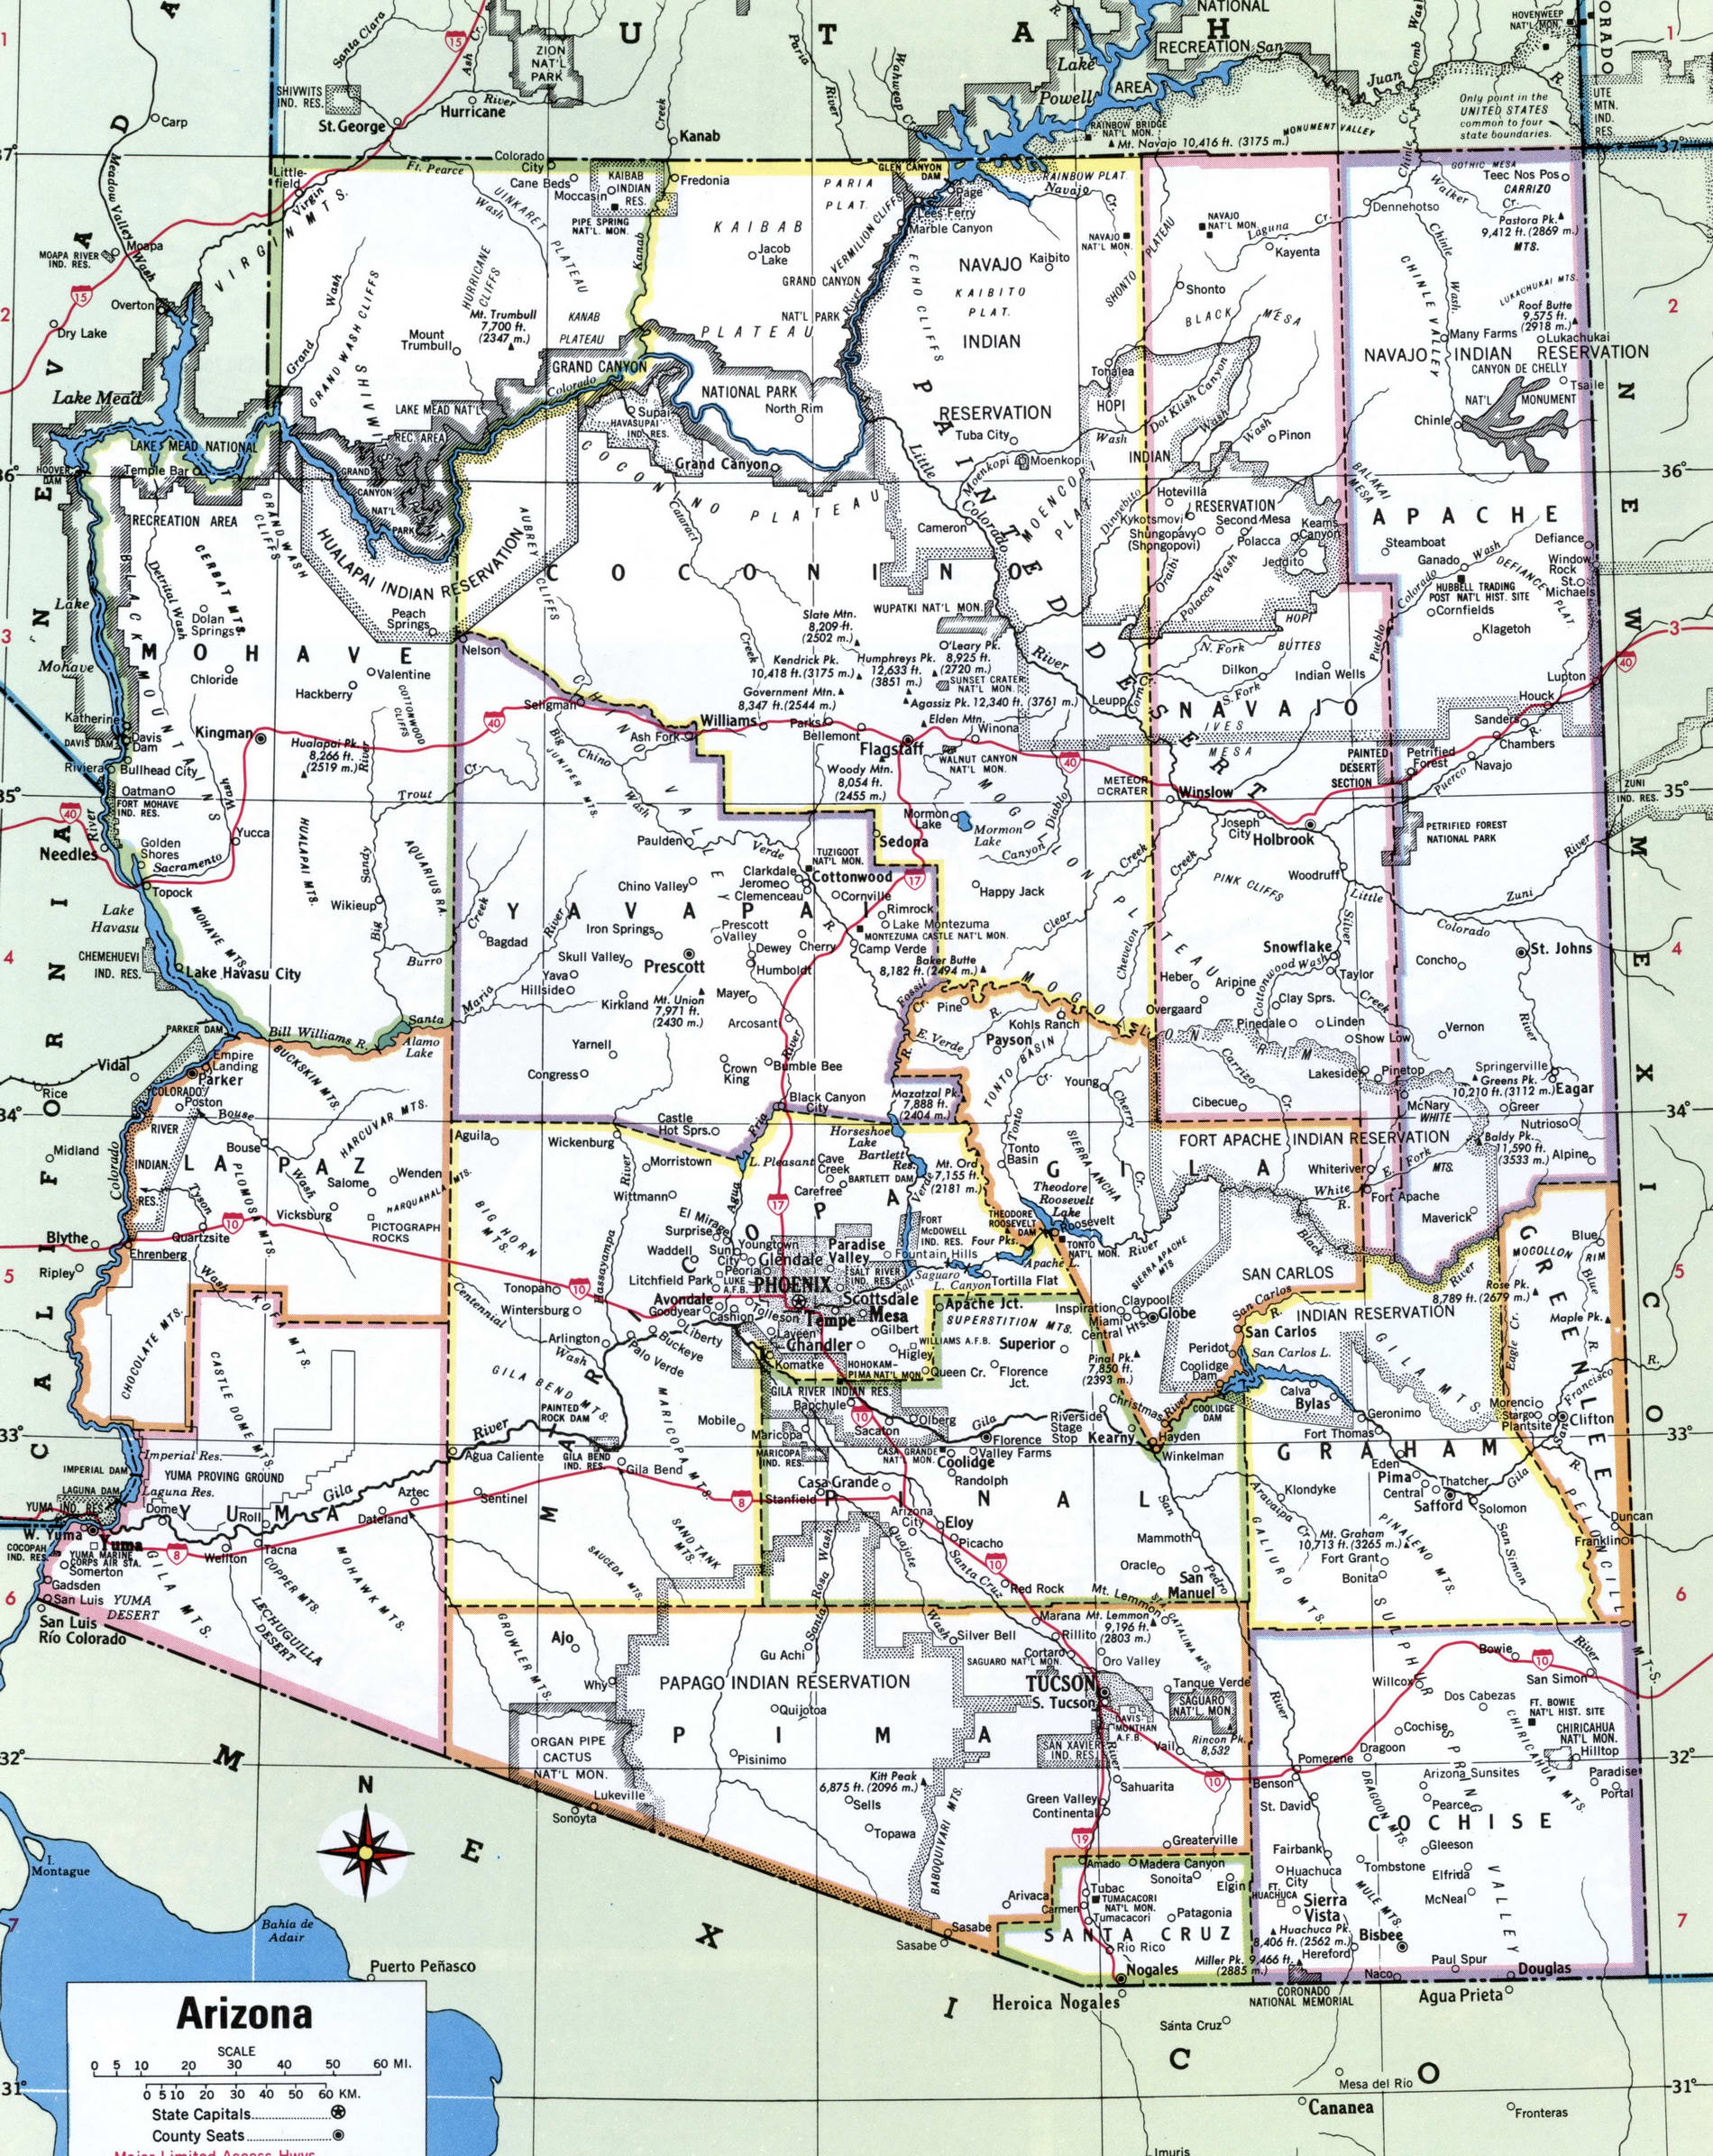 Arizona State Map With Counties And Cities - United States Map